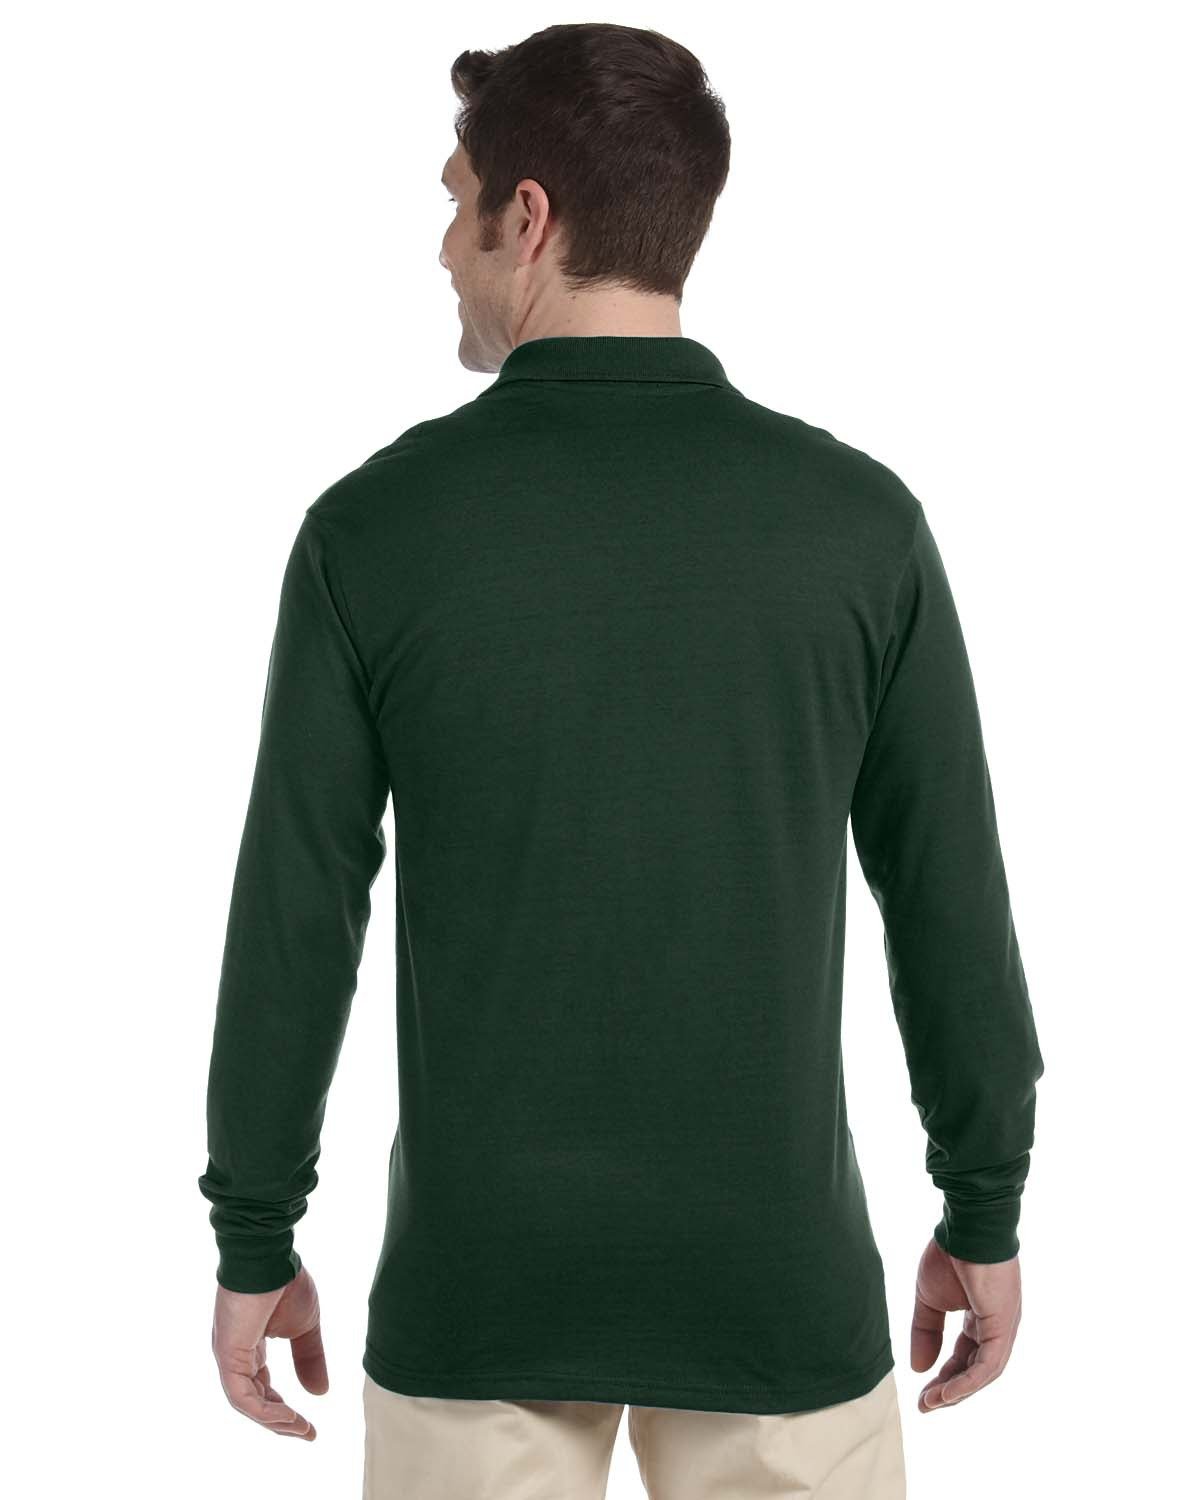 437ML-Jerzees-FOREST GREEN-Jerzees-Polos-2